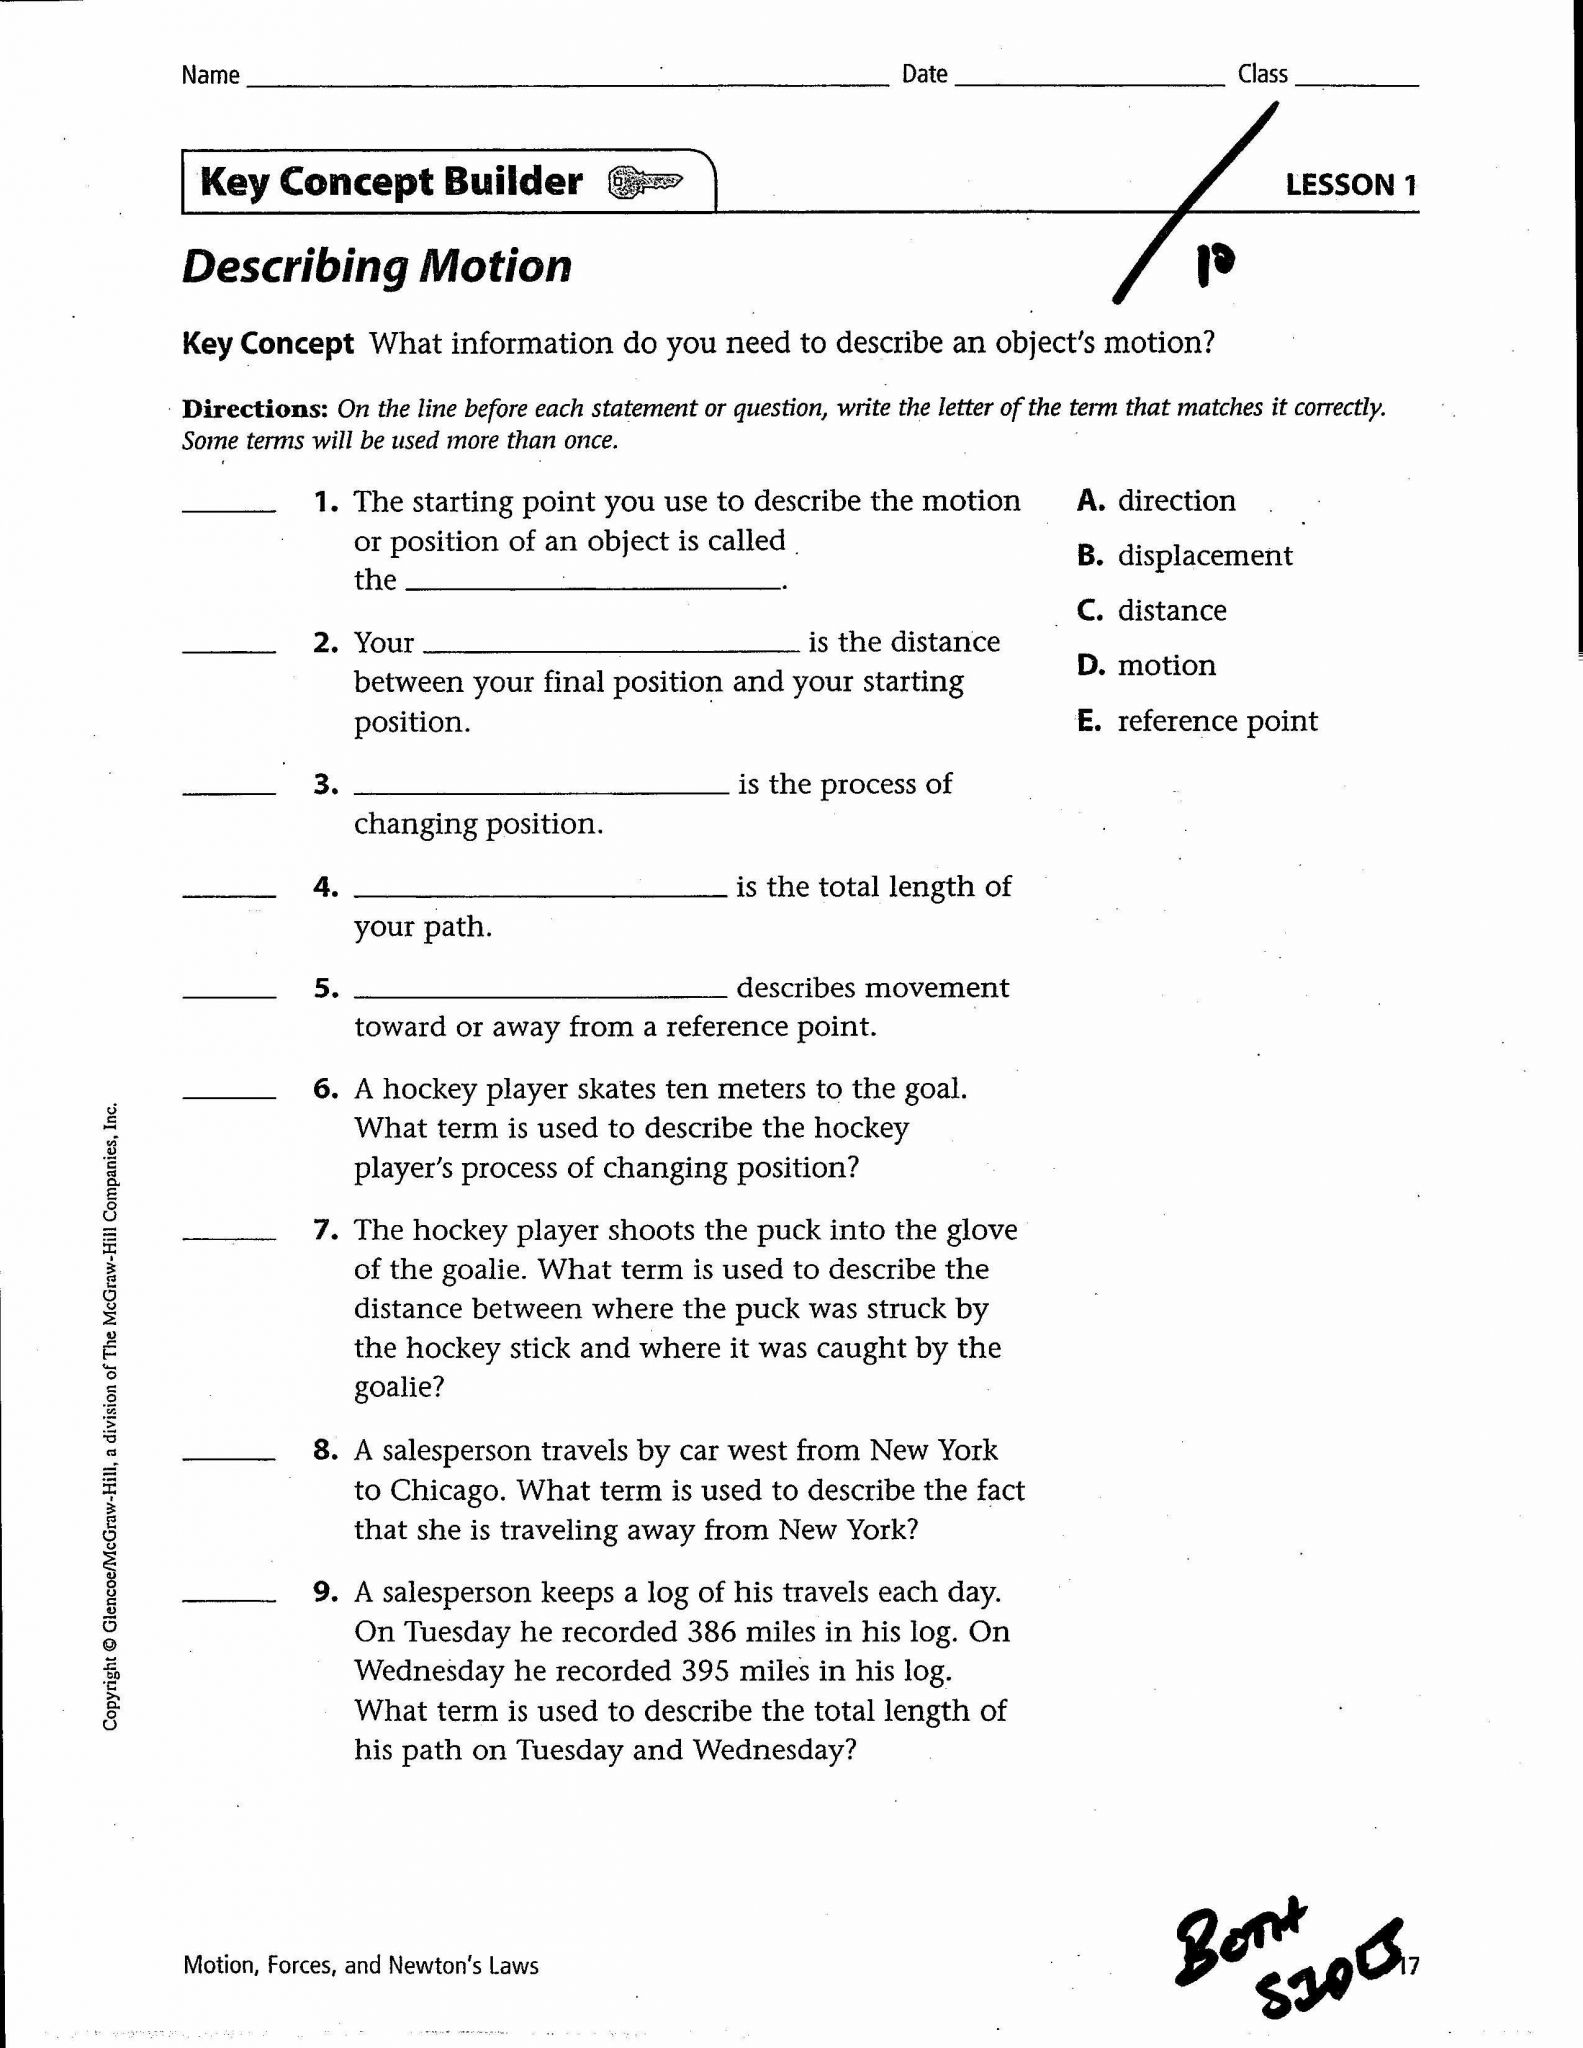 Potential and Kinetic Energy Roller Coaster Worksheet together with Kinetic Energy Worksheet F5527b312a9b Battk